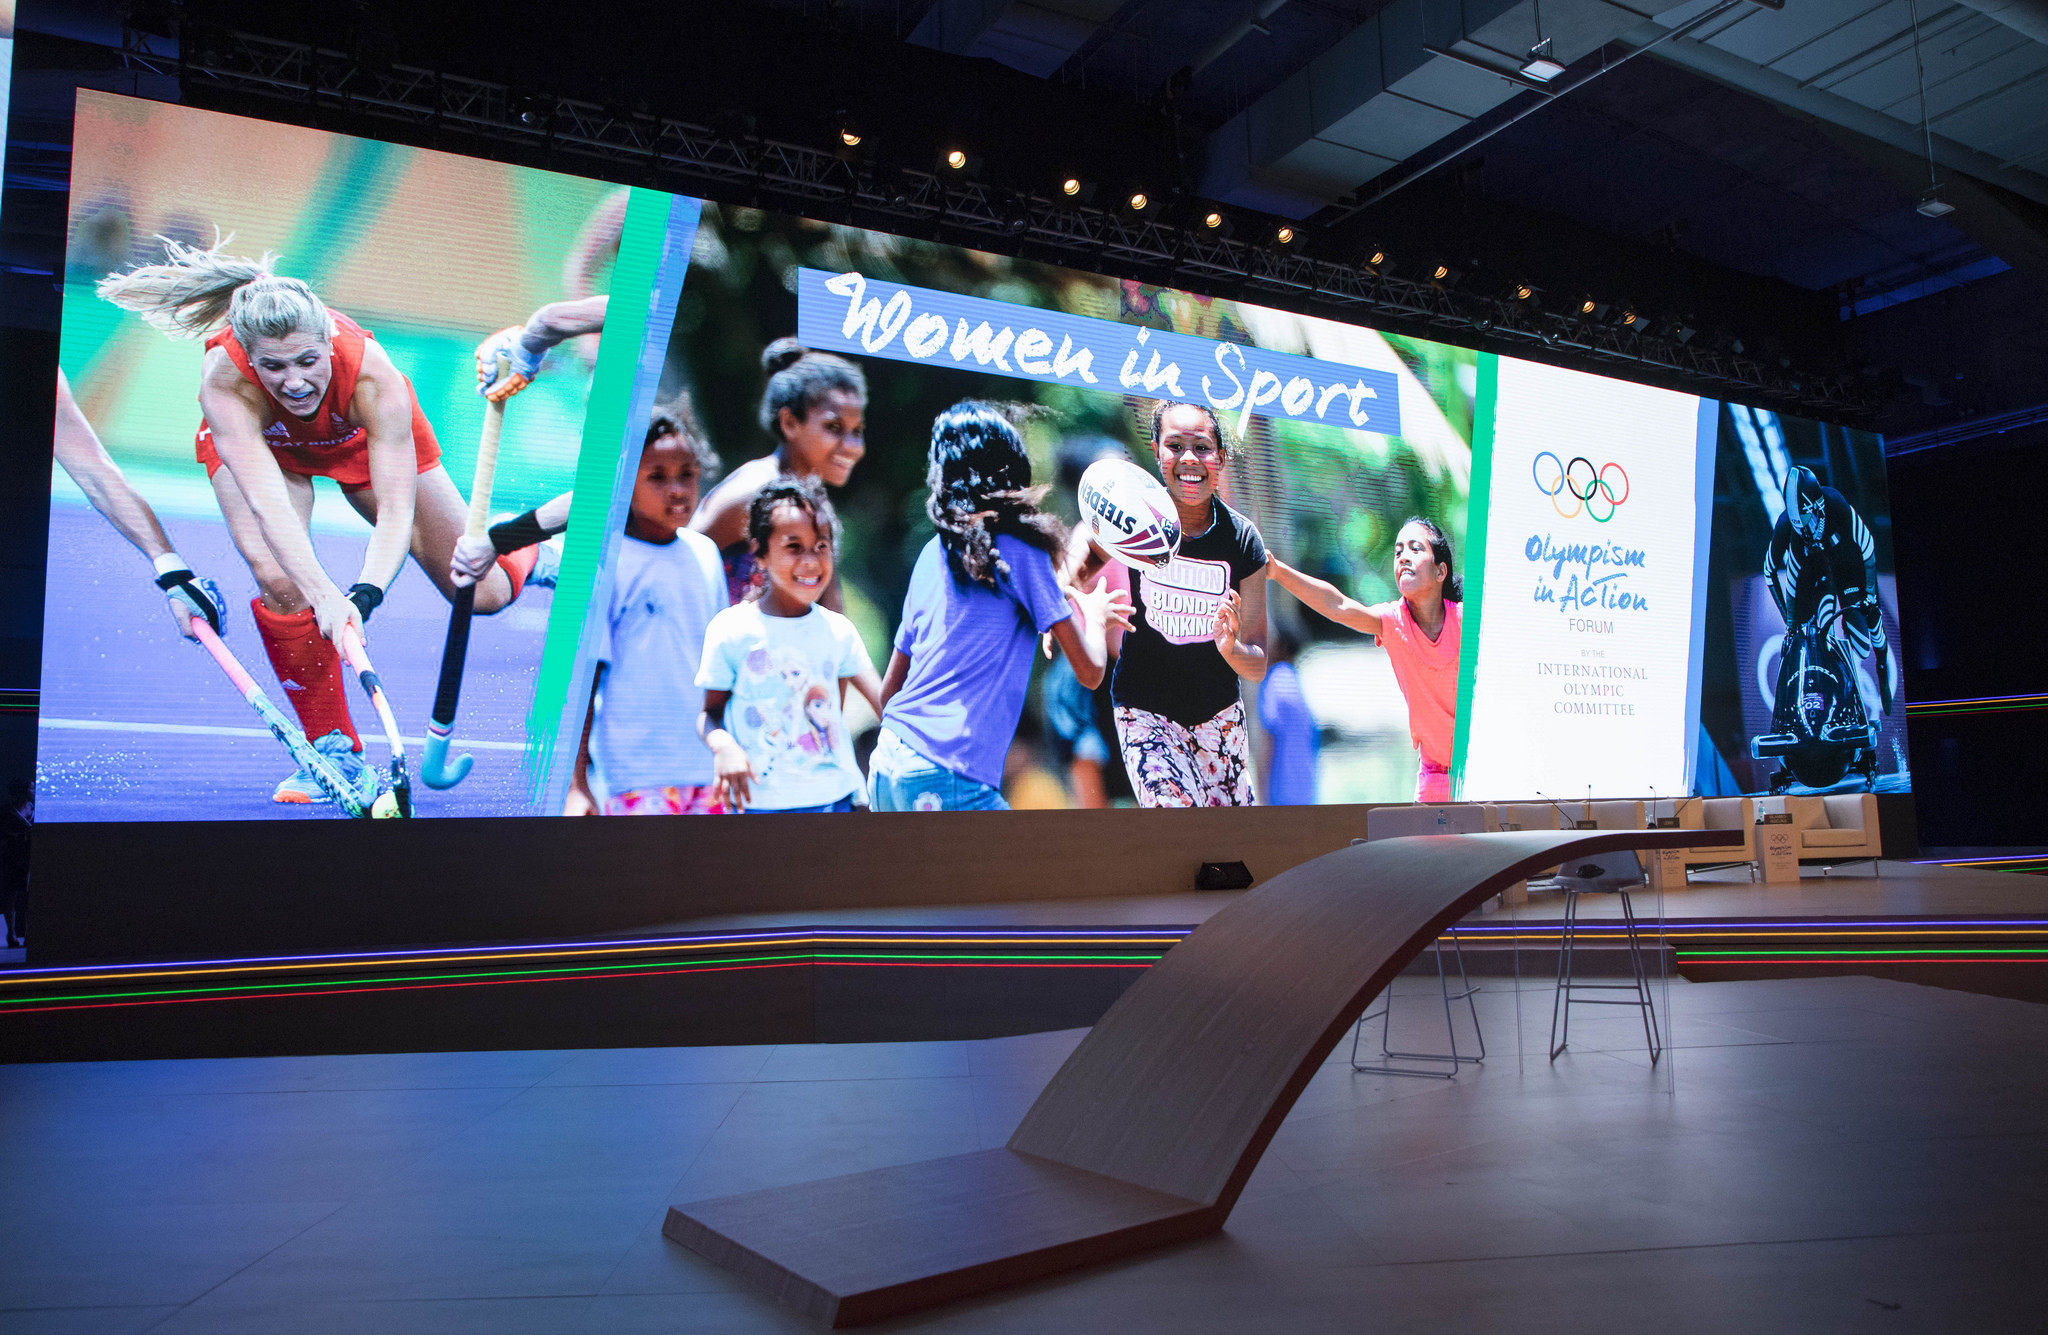 The Forum provided several interesting discussions, including on the topic of women in sport ©IOC